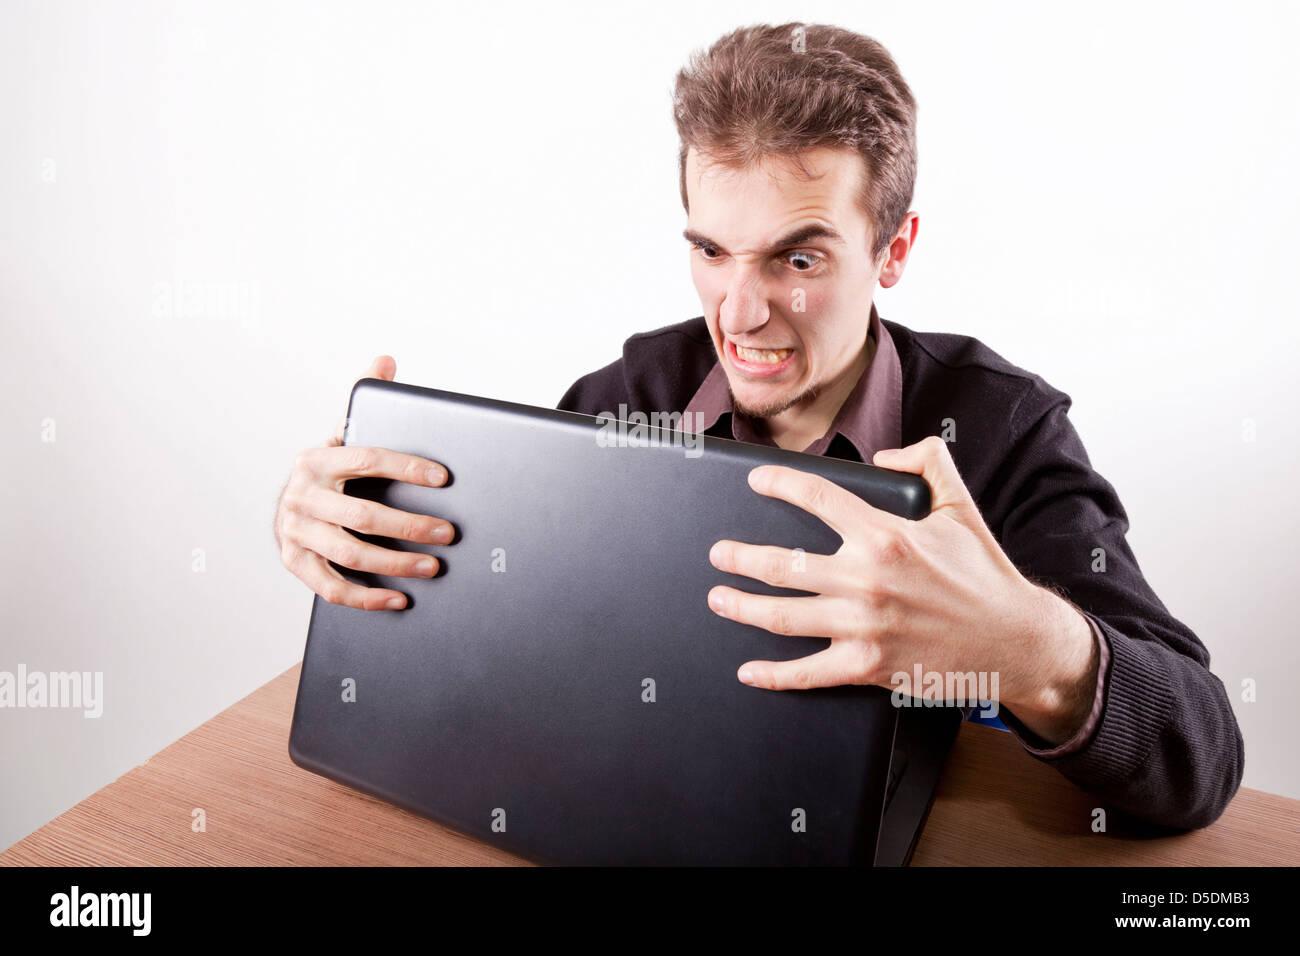 young man holding a laptop with both hands on a desk very angry and upset Stock Photo